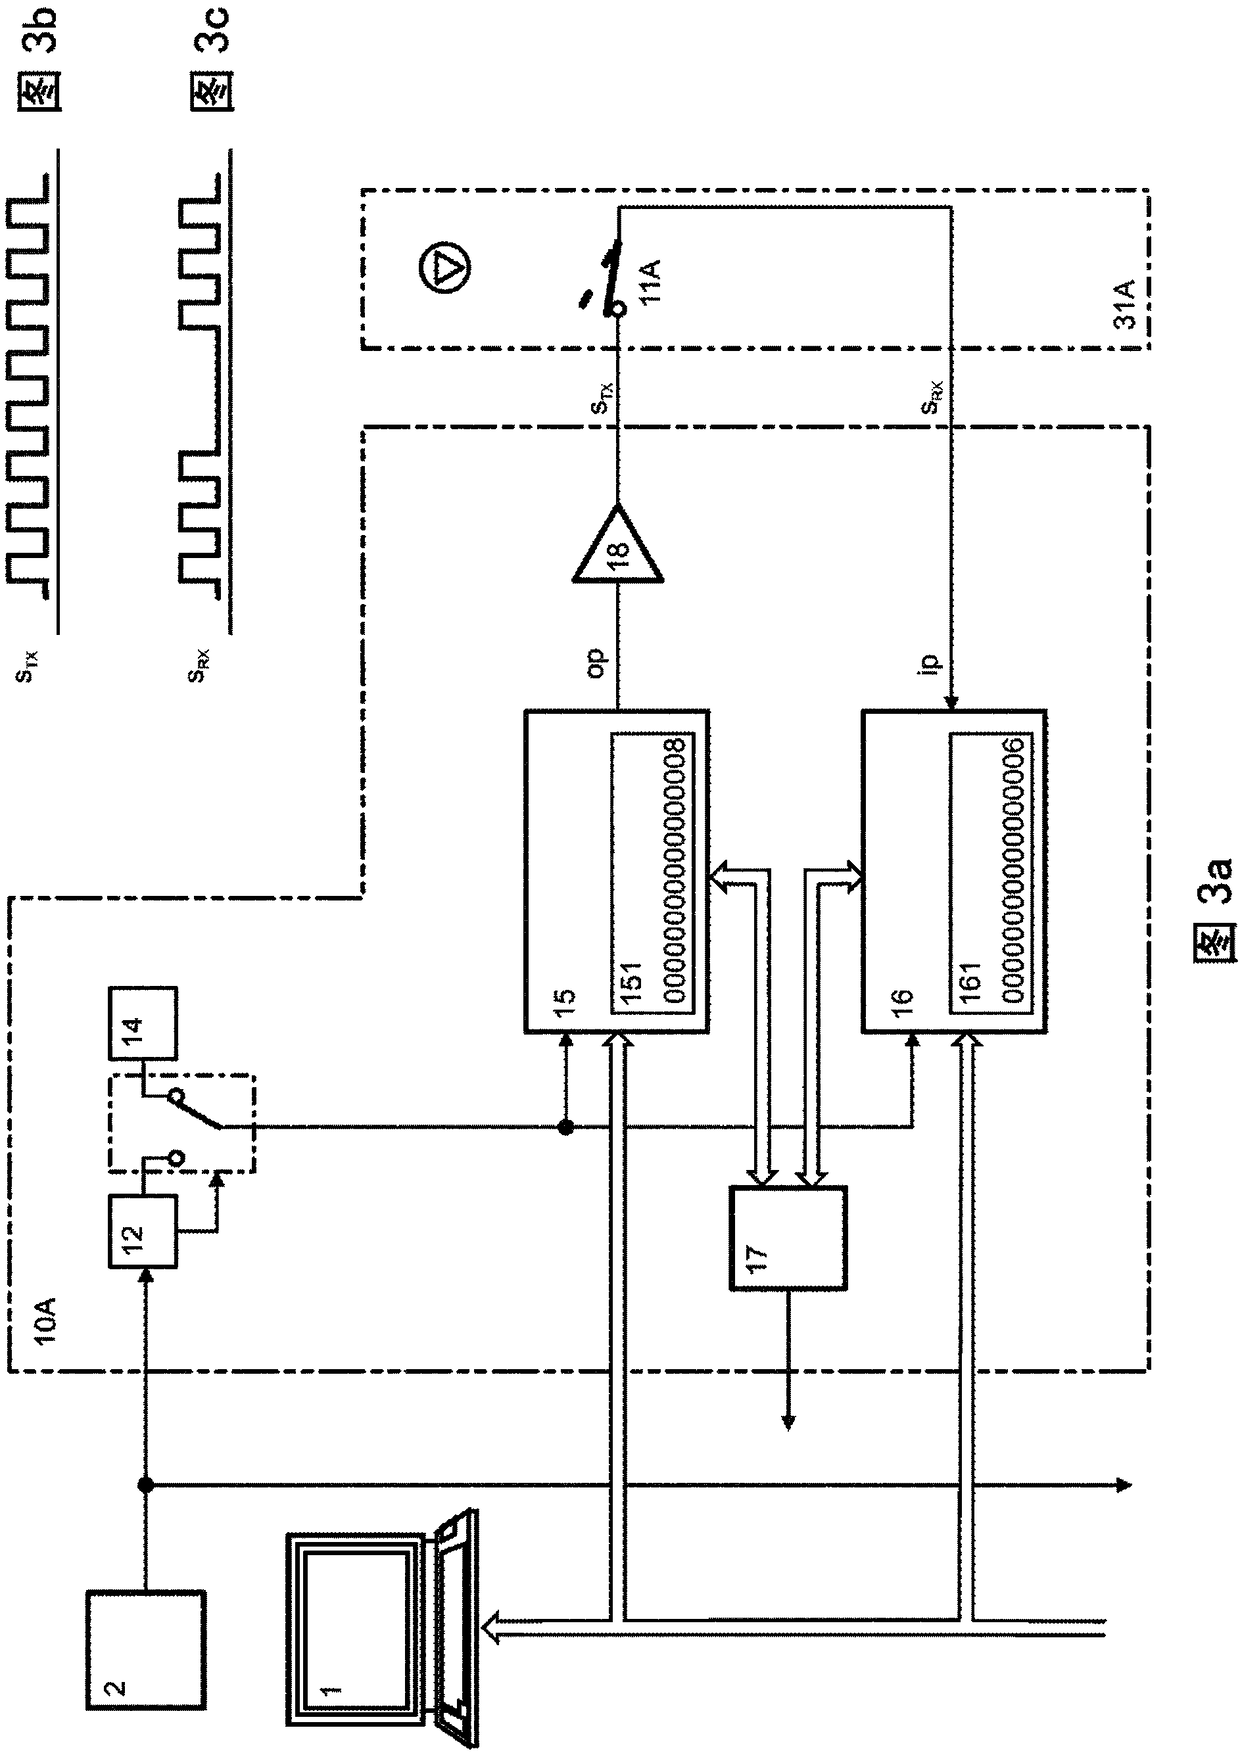 Method and apparatus for controlling an elevator system